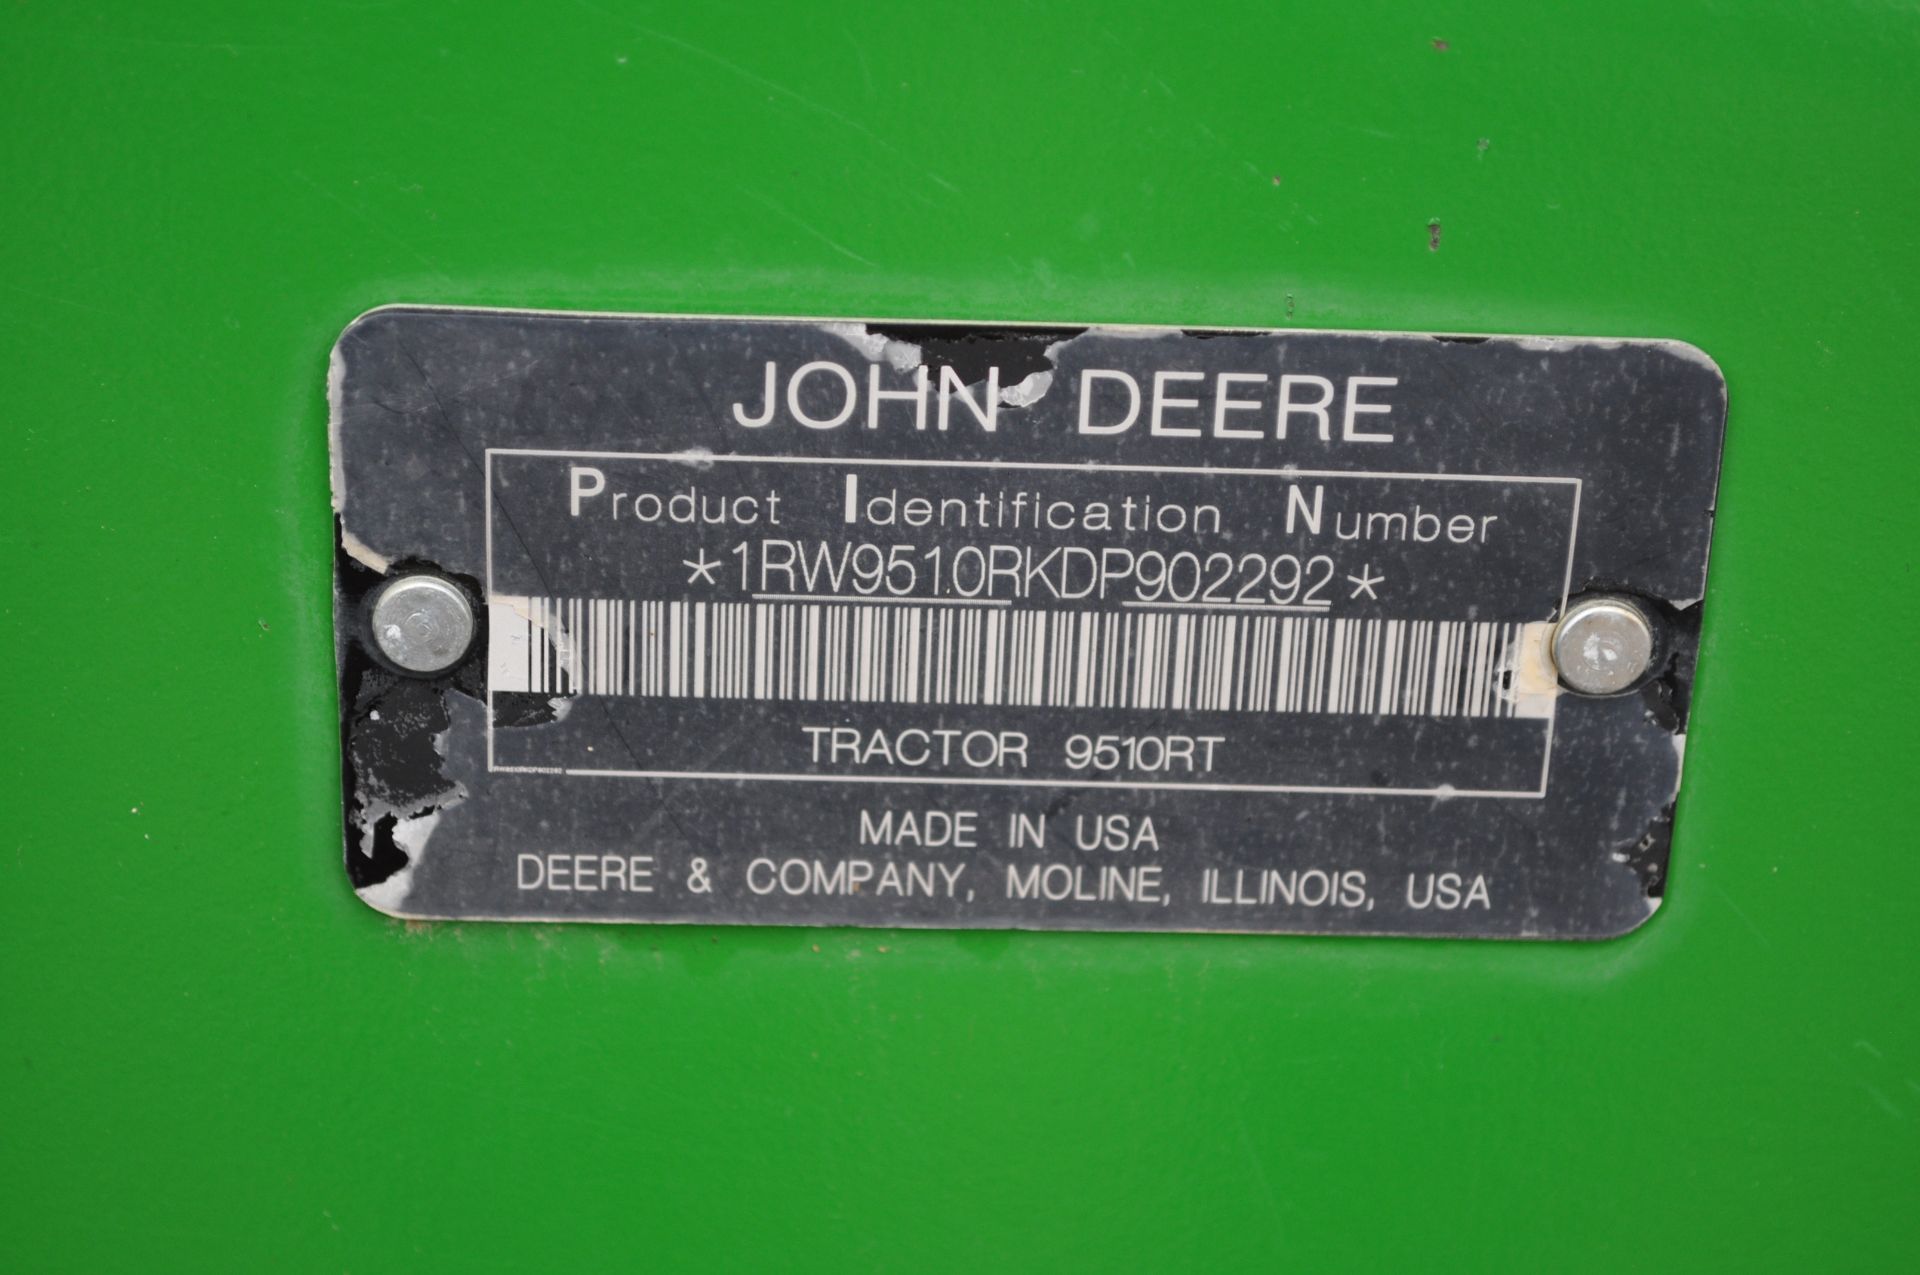 John Deere 9510RT track tractor, 36” belts, front weights, Powershift, 5 hyd remotes, 1000 PTO - Image 5 of 34